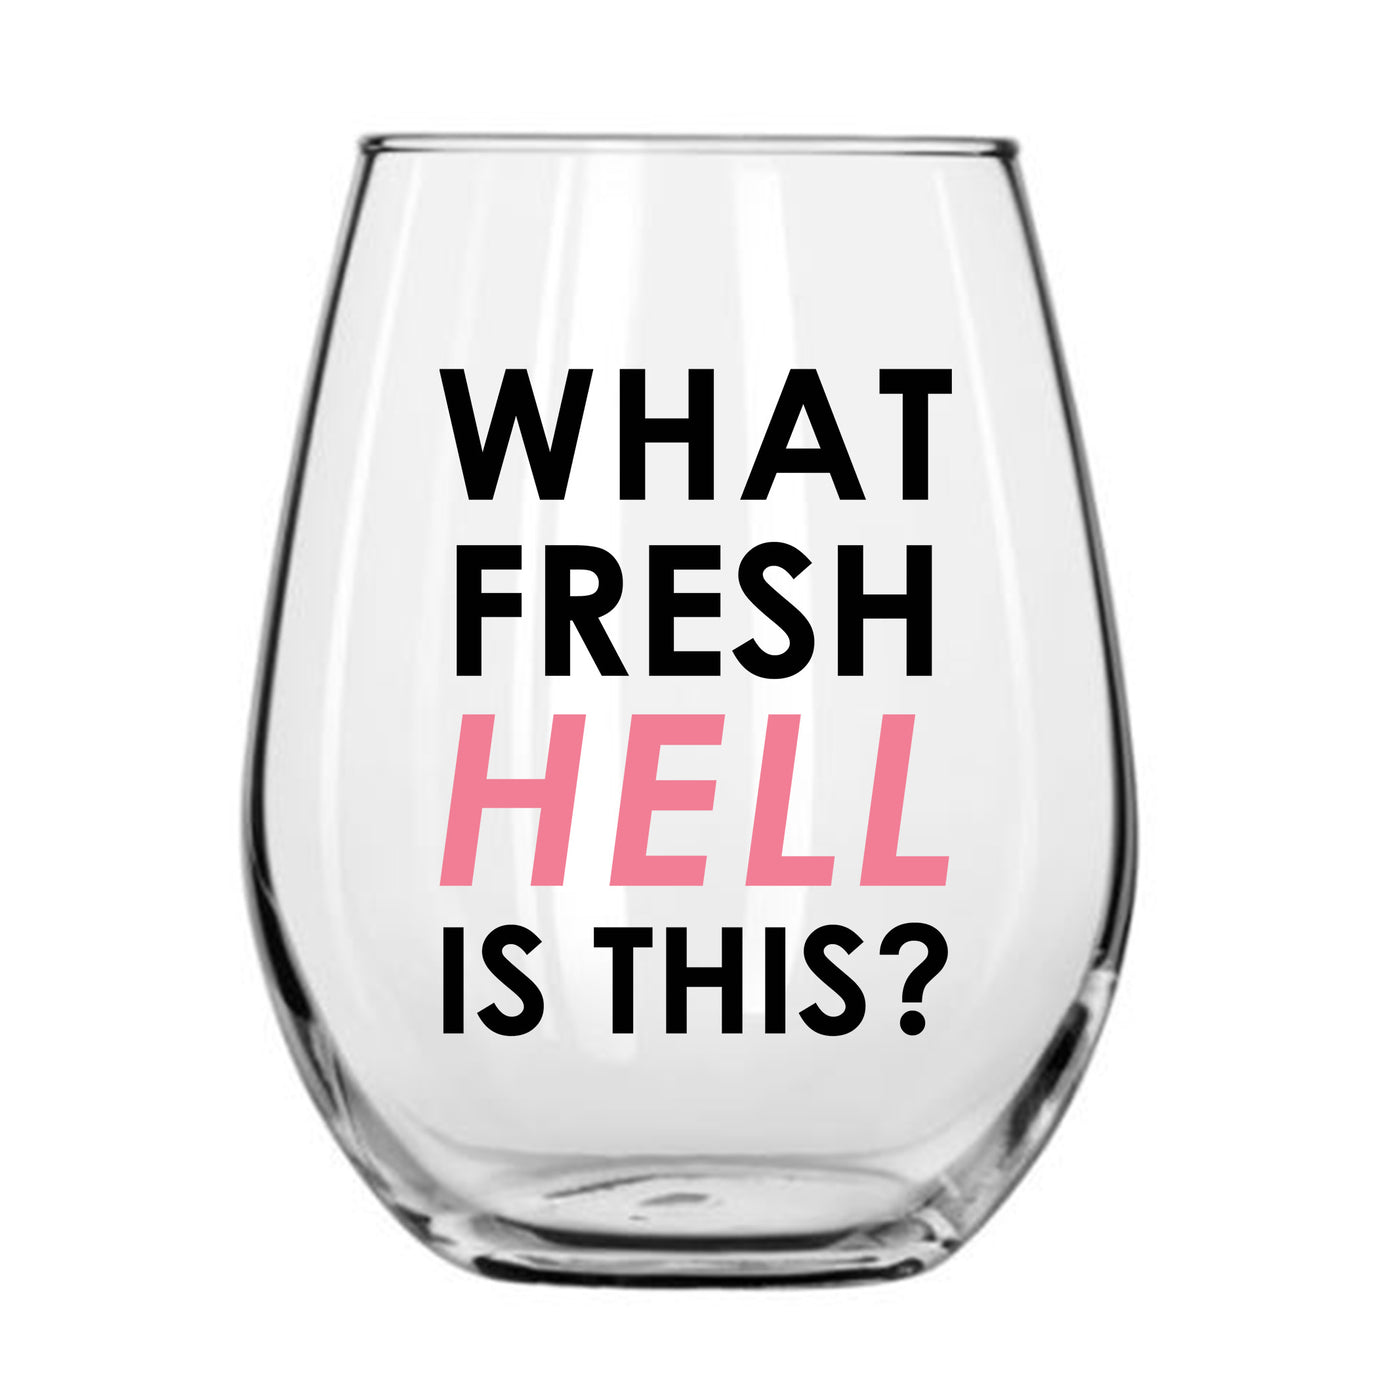 WHAT FRESH HELL IS THIS WINE GLASS